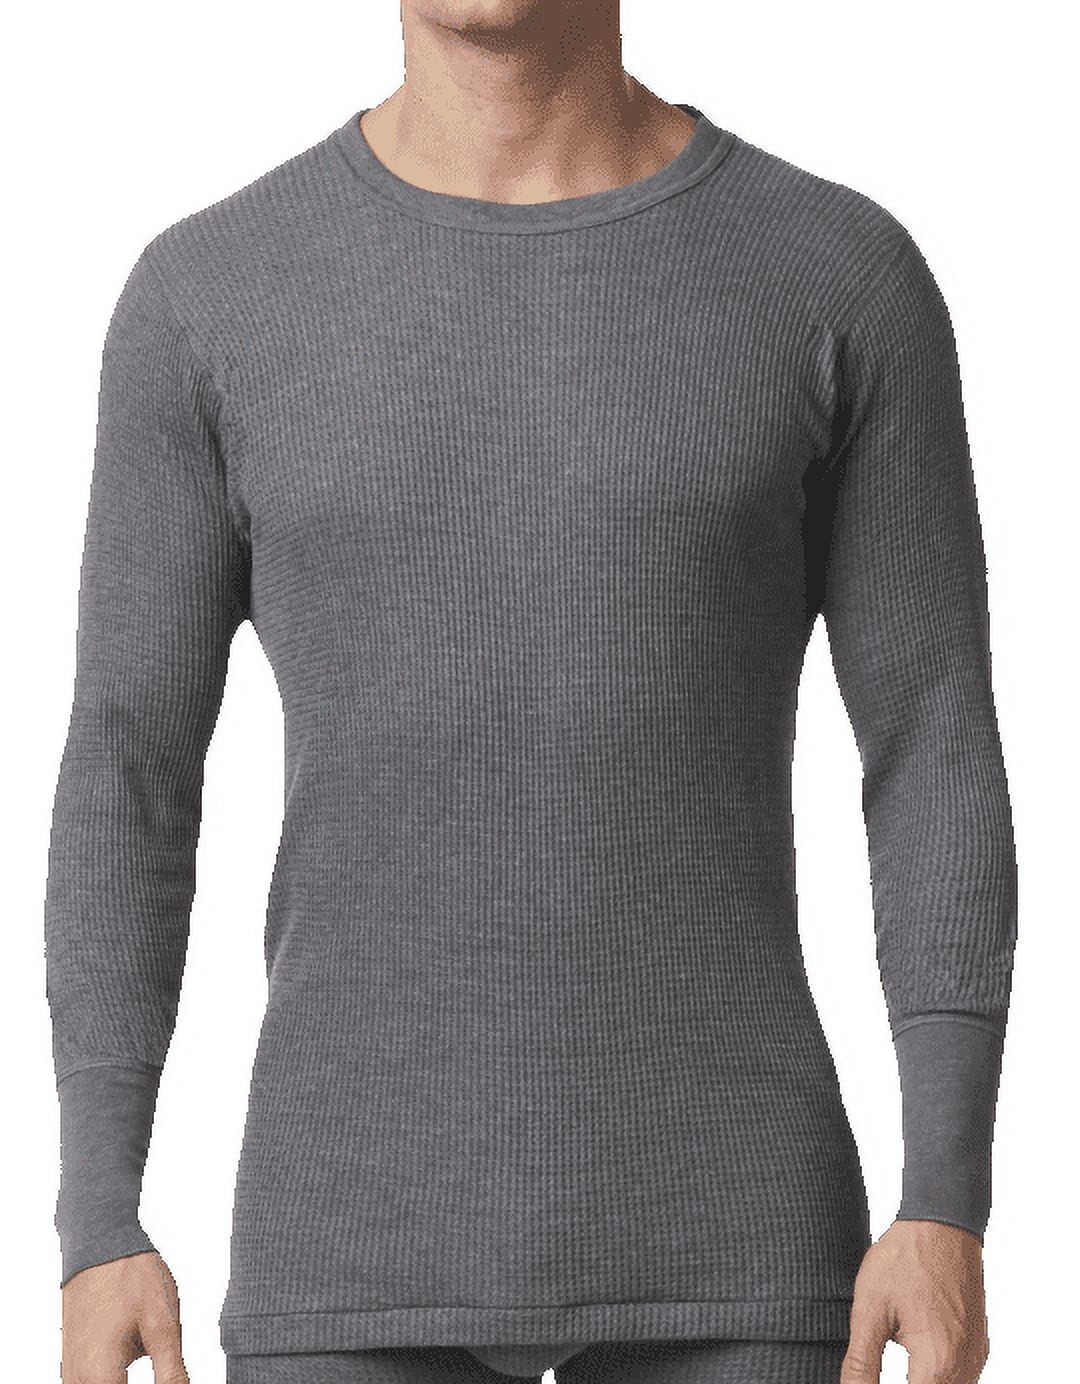 Misty Mountain Men's Thermal Base Layer Long Sleeve Undershirt Top Cotton  Waffle Knit